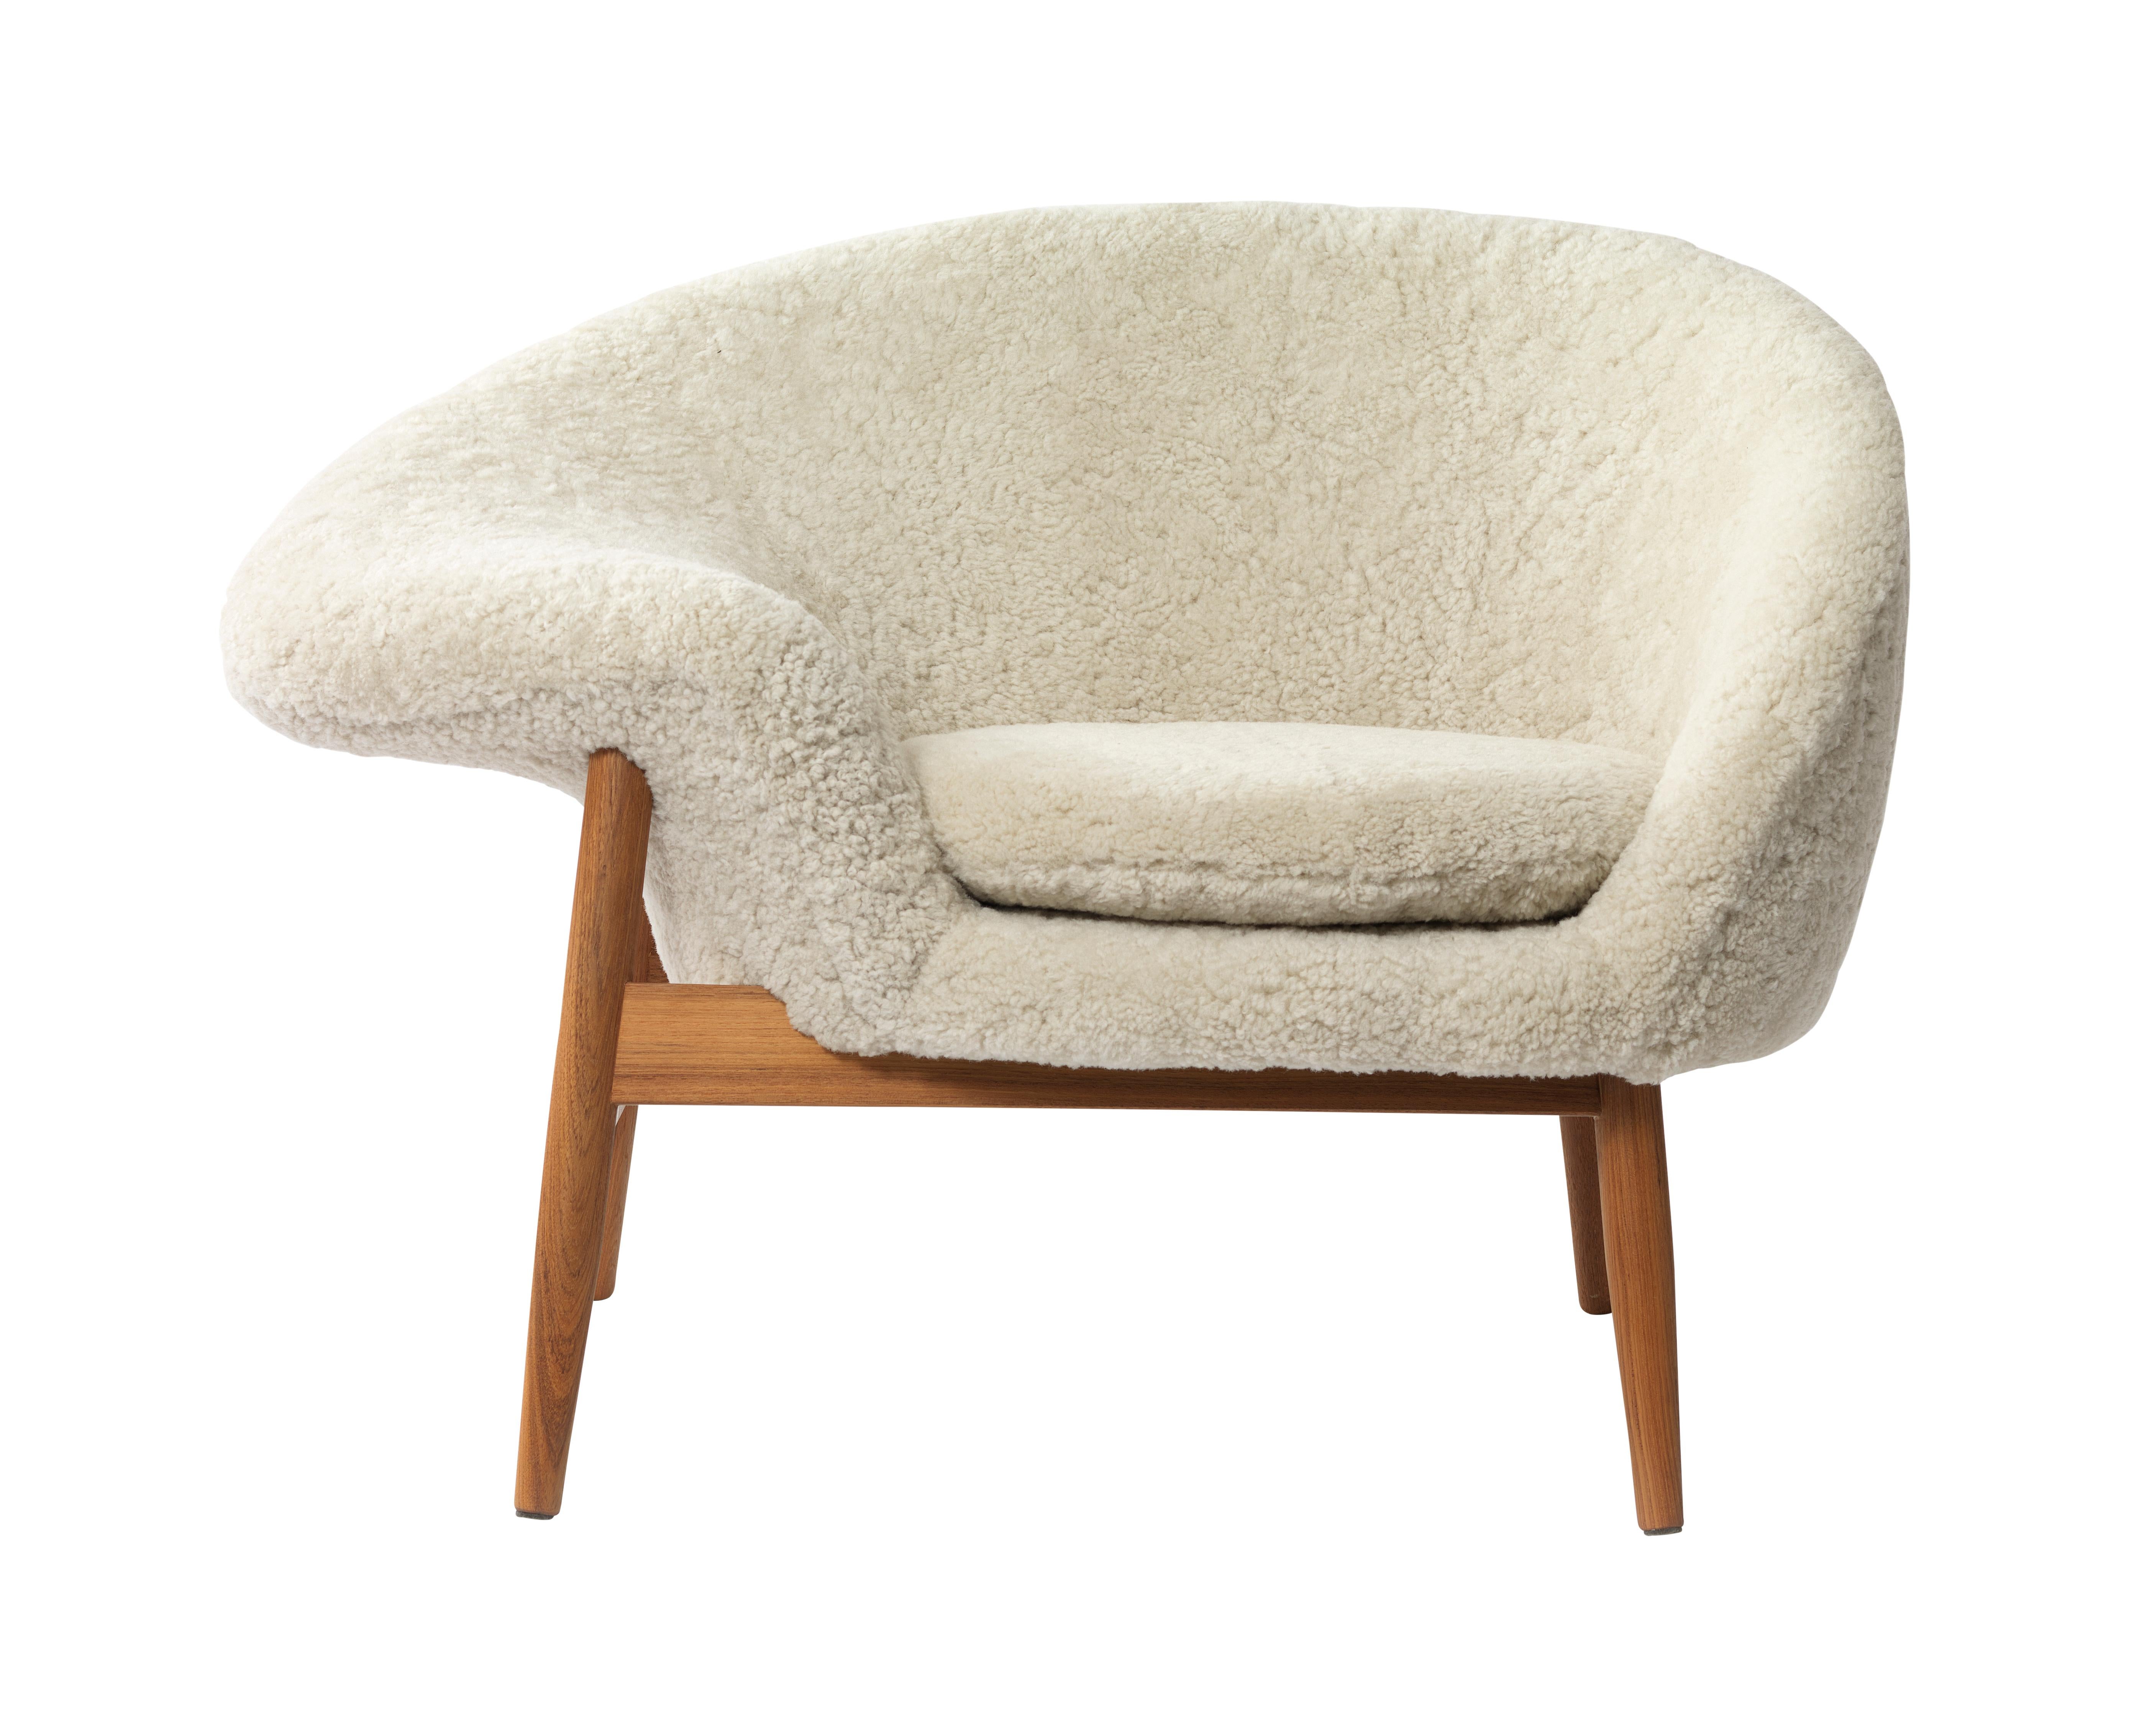 For Sale: Beige (Sheep Moonlight) Fried Egg Chair Sheep Chair, by Hans Olsen from Warm Nordic